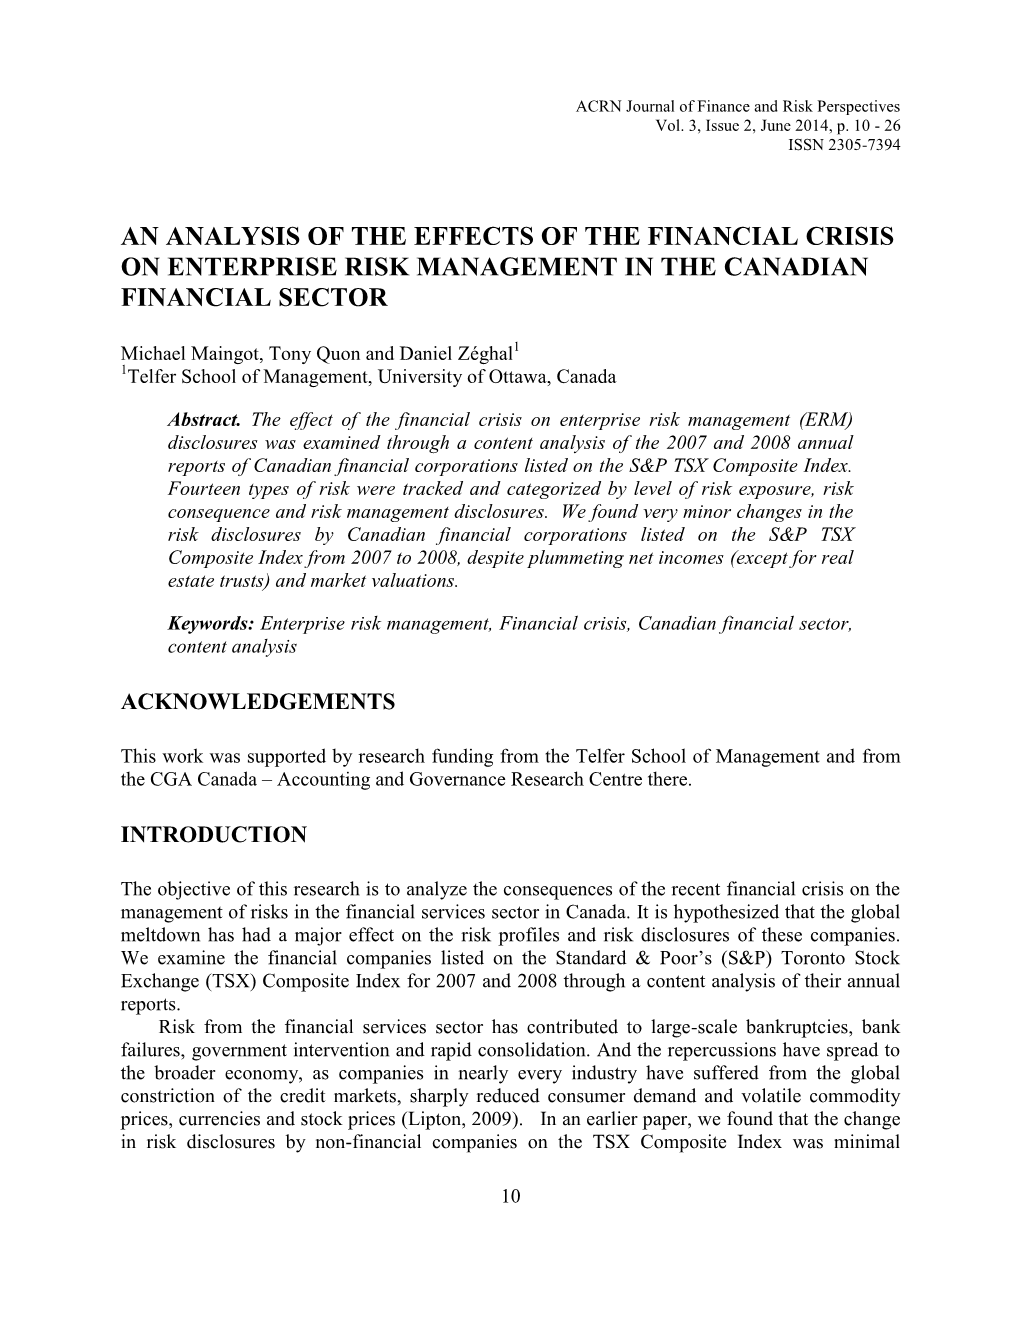 An Analysis of the Effects of the Financial Crisis on Enterprise Risk Management in the Canadian Financial Sector